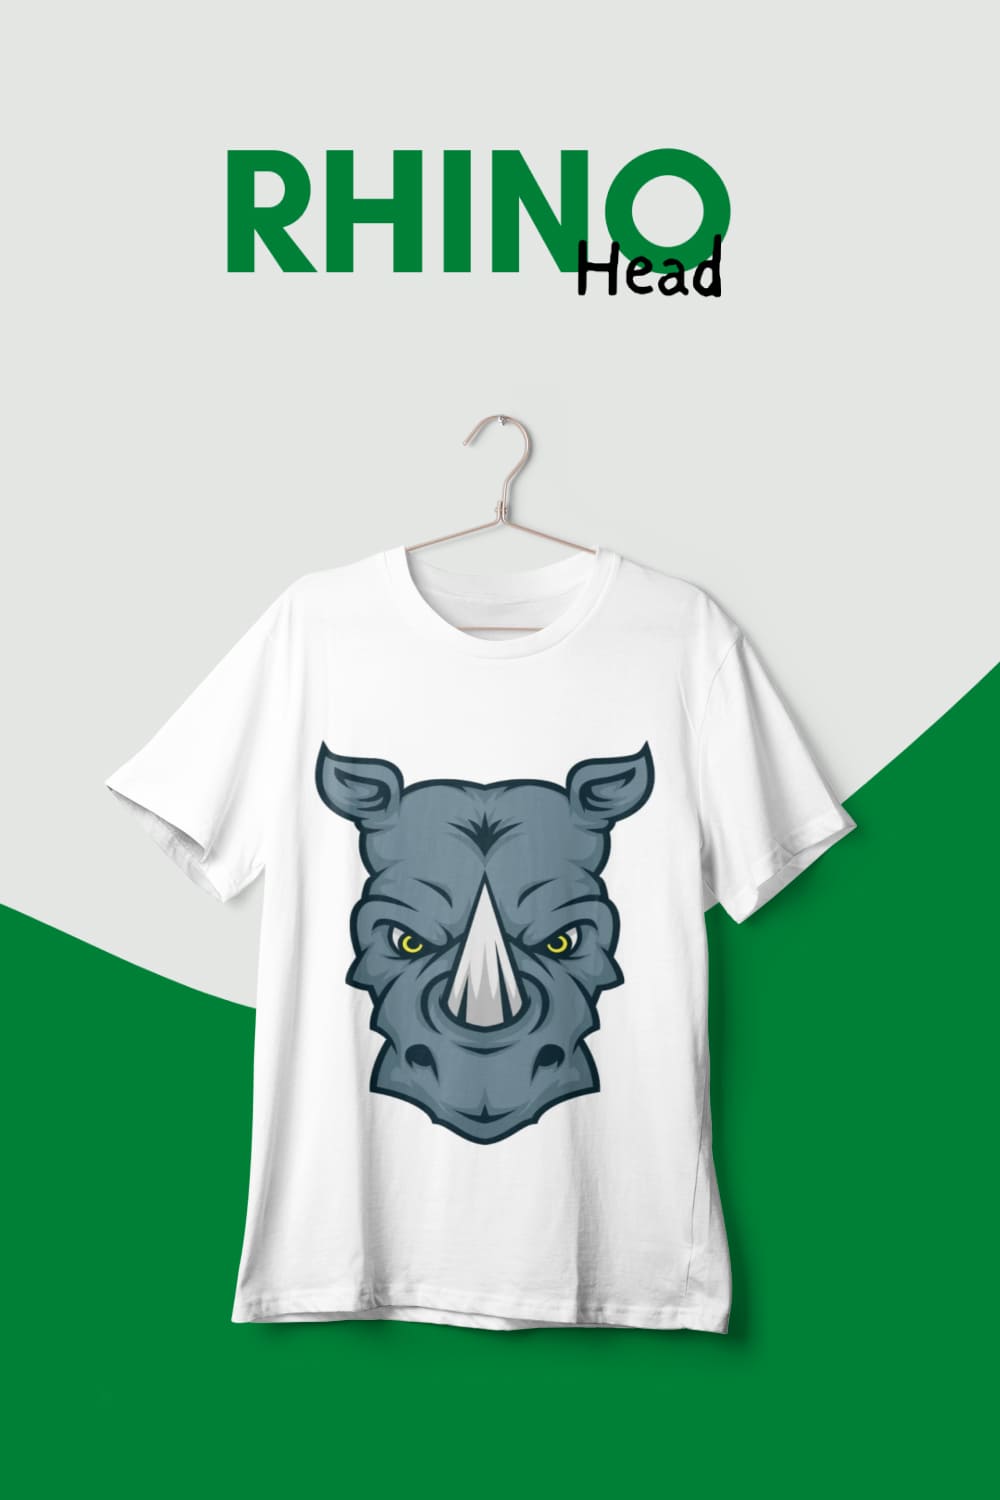 Image of a t-shirt with a gorgeous print with a rhino head.